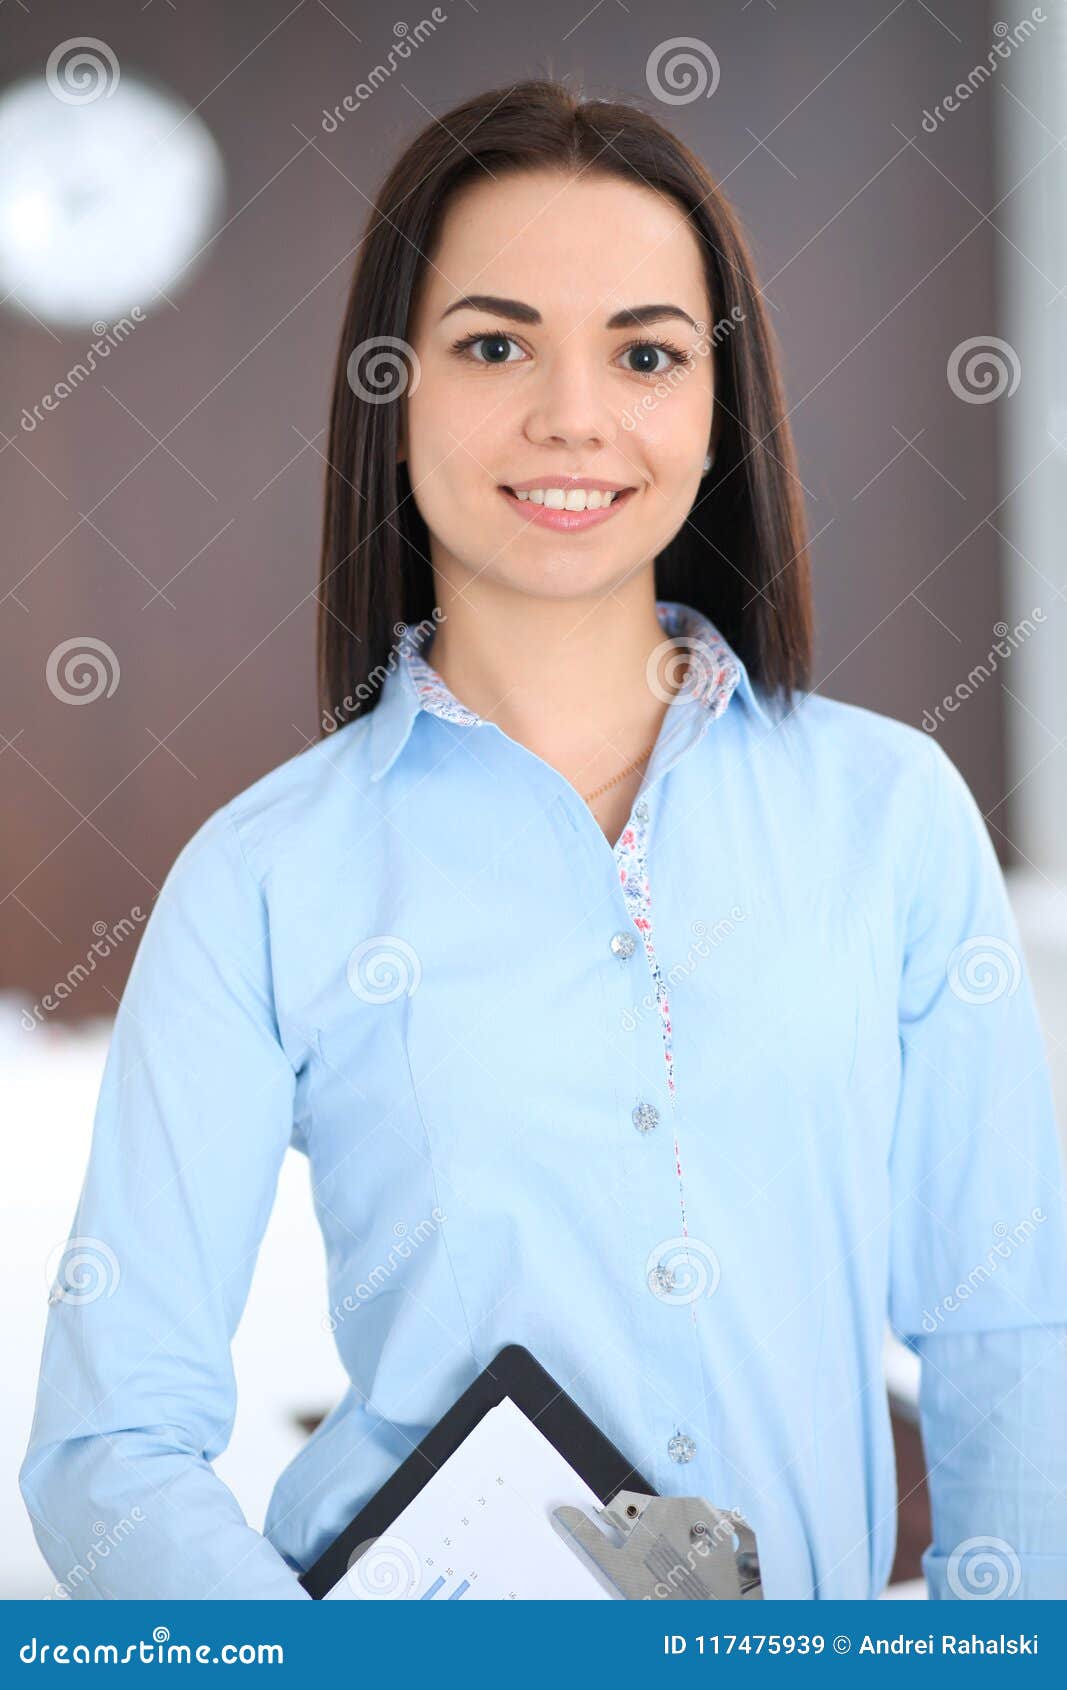 https://thumbs.dreamstime.com/z/young-brunette-business-woman-looks-like-student-girl-working-office-hispanic-latin-american-girl-standing-young-brunette-117475939.jpg